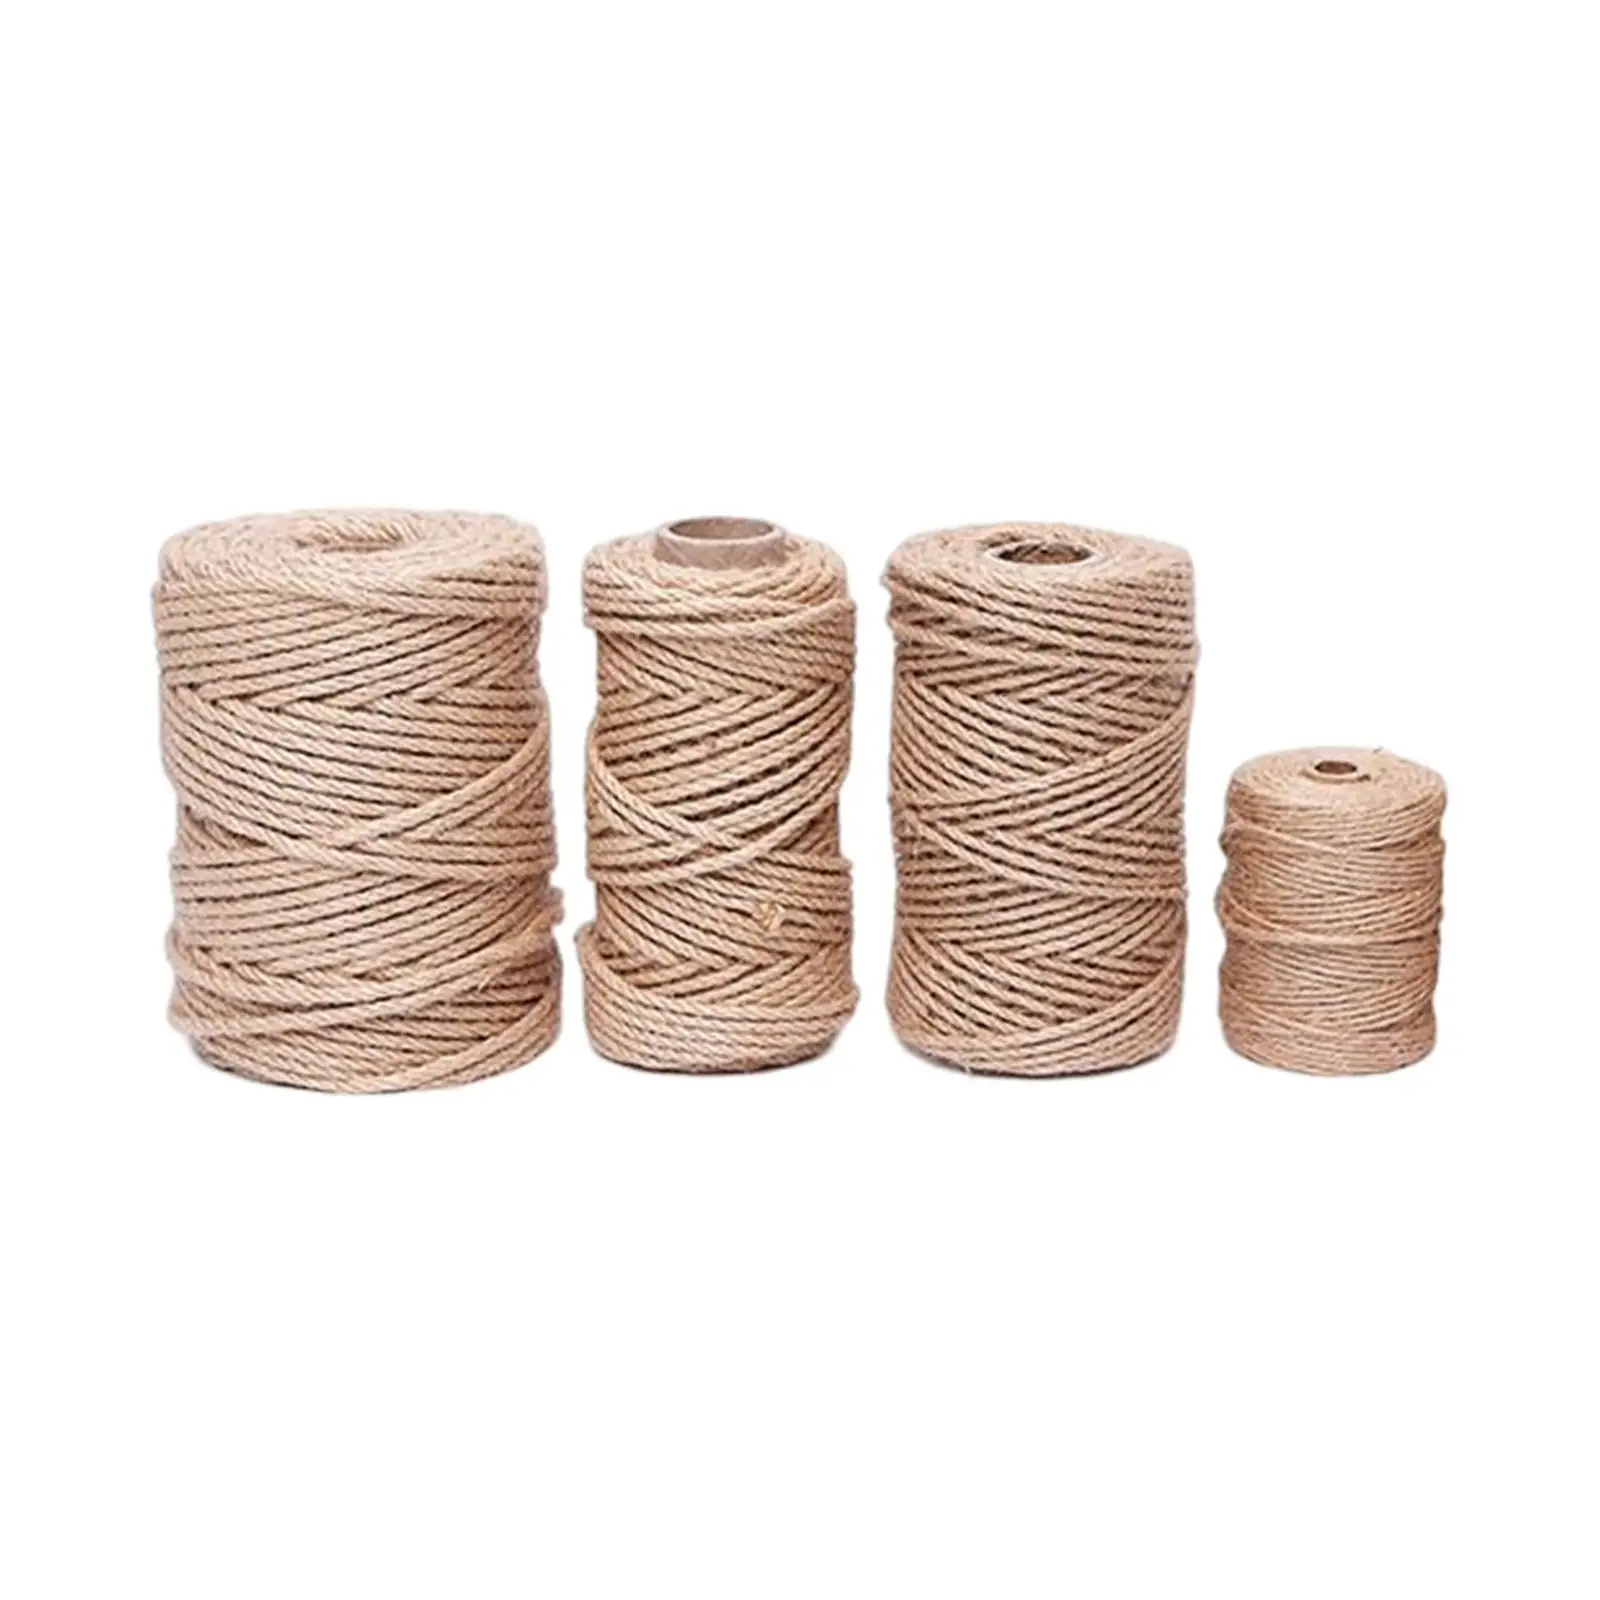 Jute Twine Rope Durable Sisal Rope for Cat Scratching Post Home Decoration Cat Scratch Boards Accessories Gift Packing Wedding